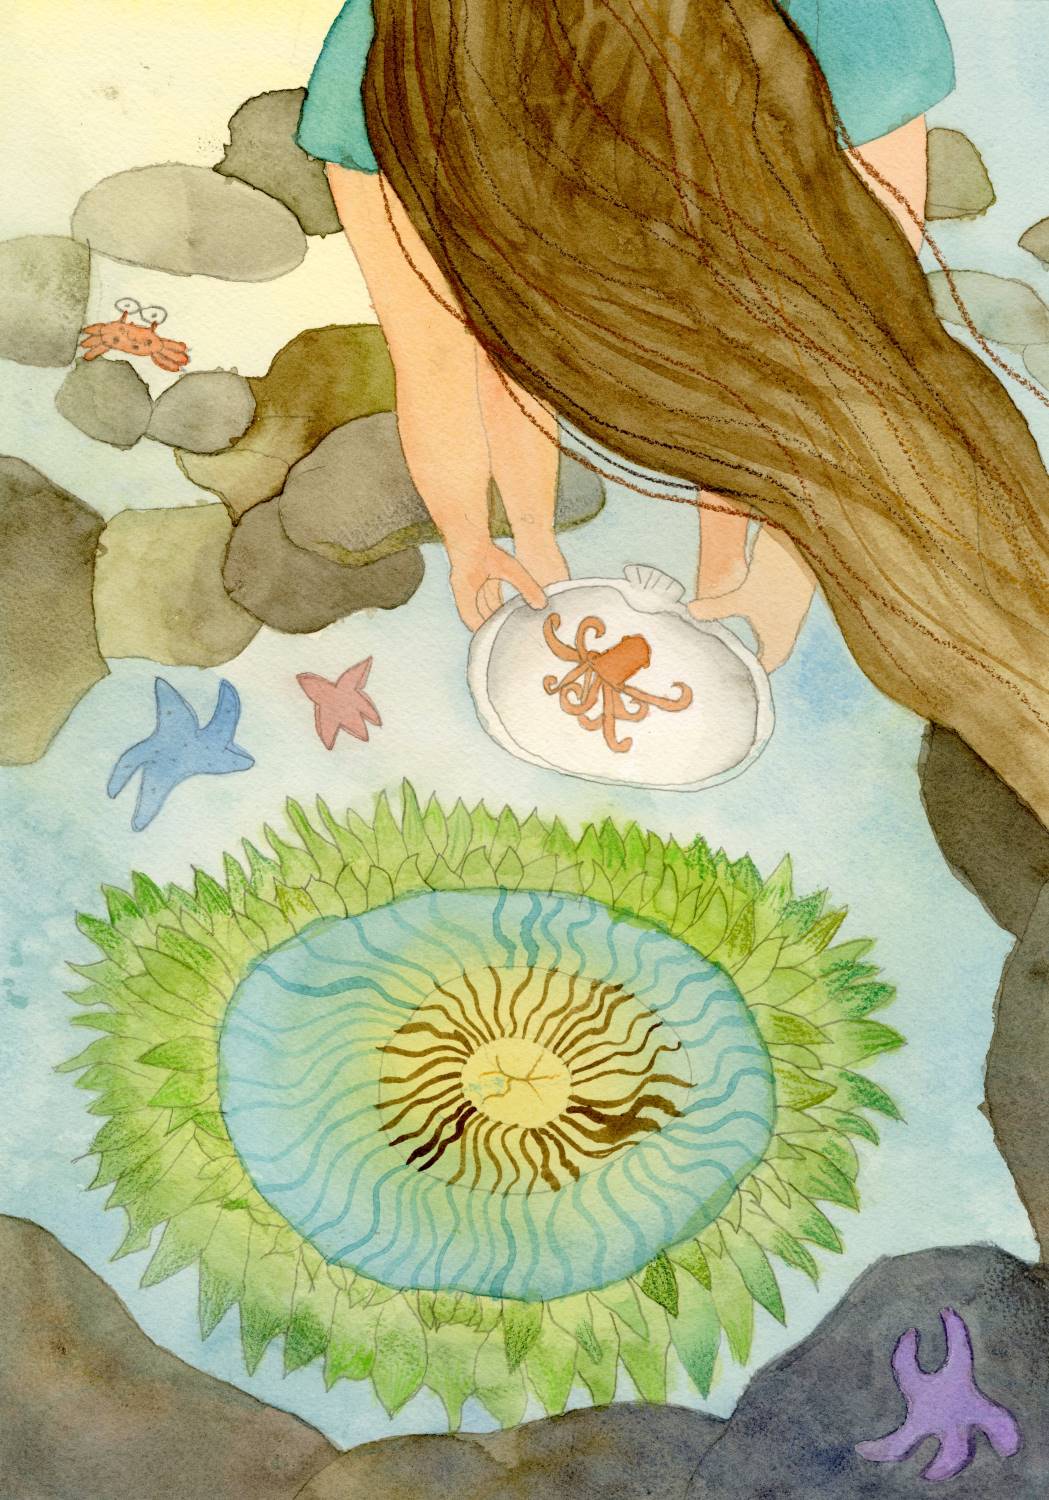 A child with long hair bends over a tidepool to examine a small octopus. A large green sea anemone, starfish, and a crab can be seen in the water